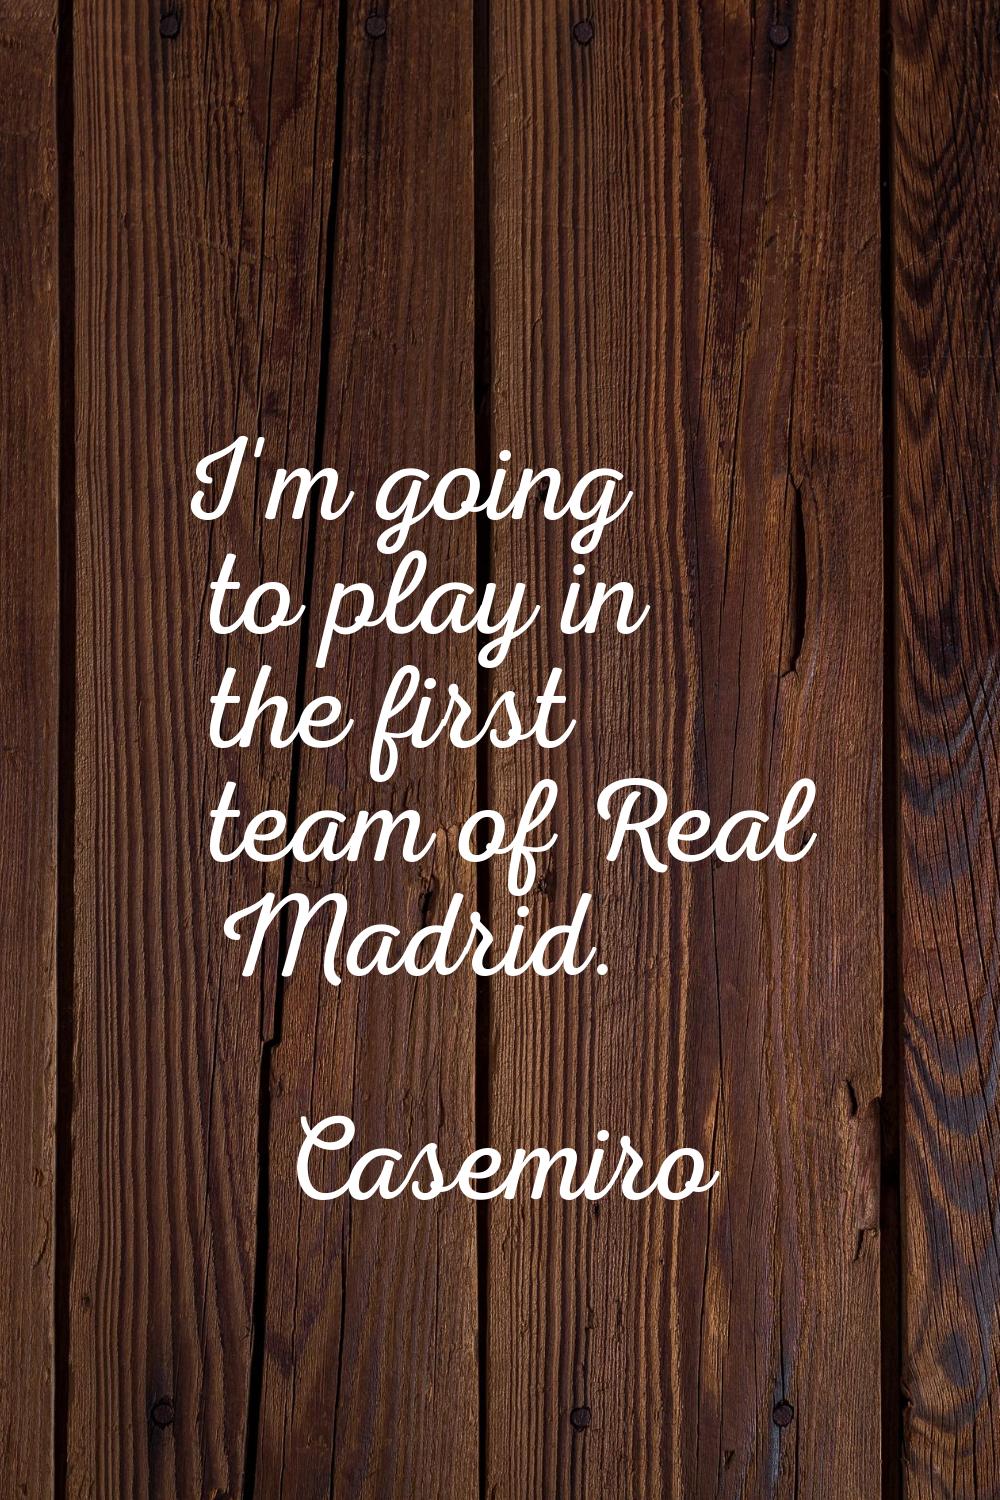 I'm going to play in the first team of Real Madrid.